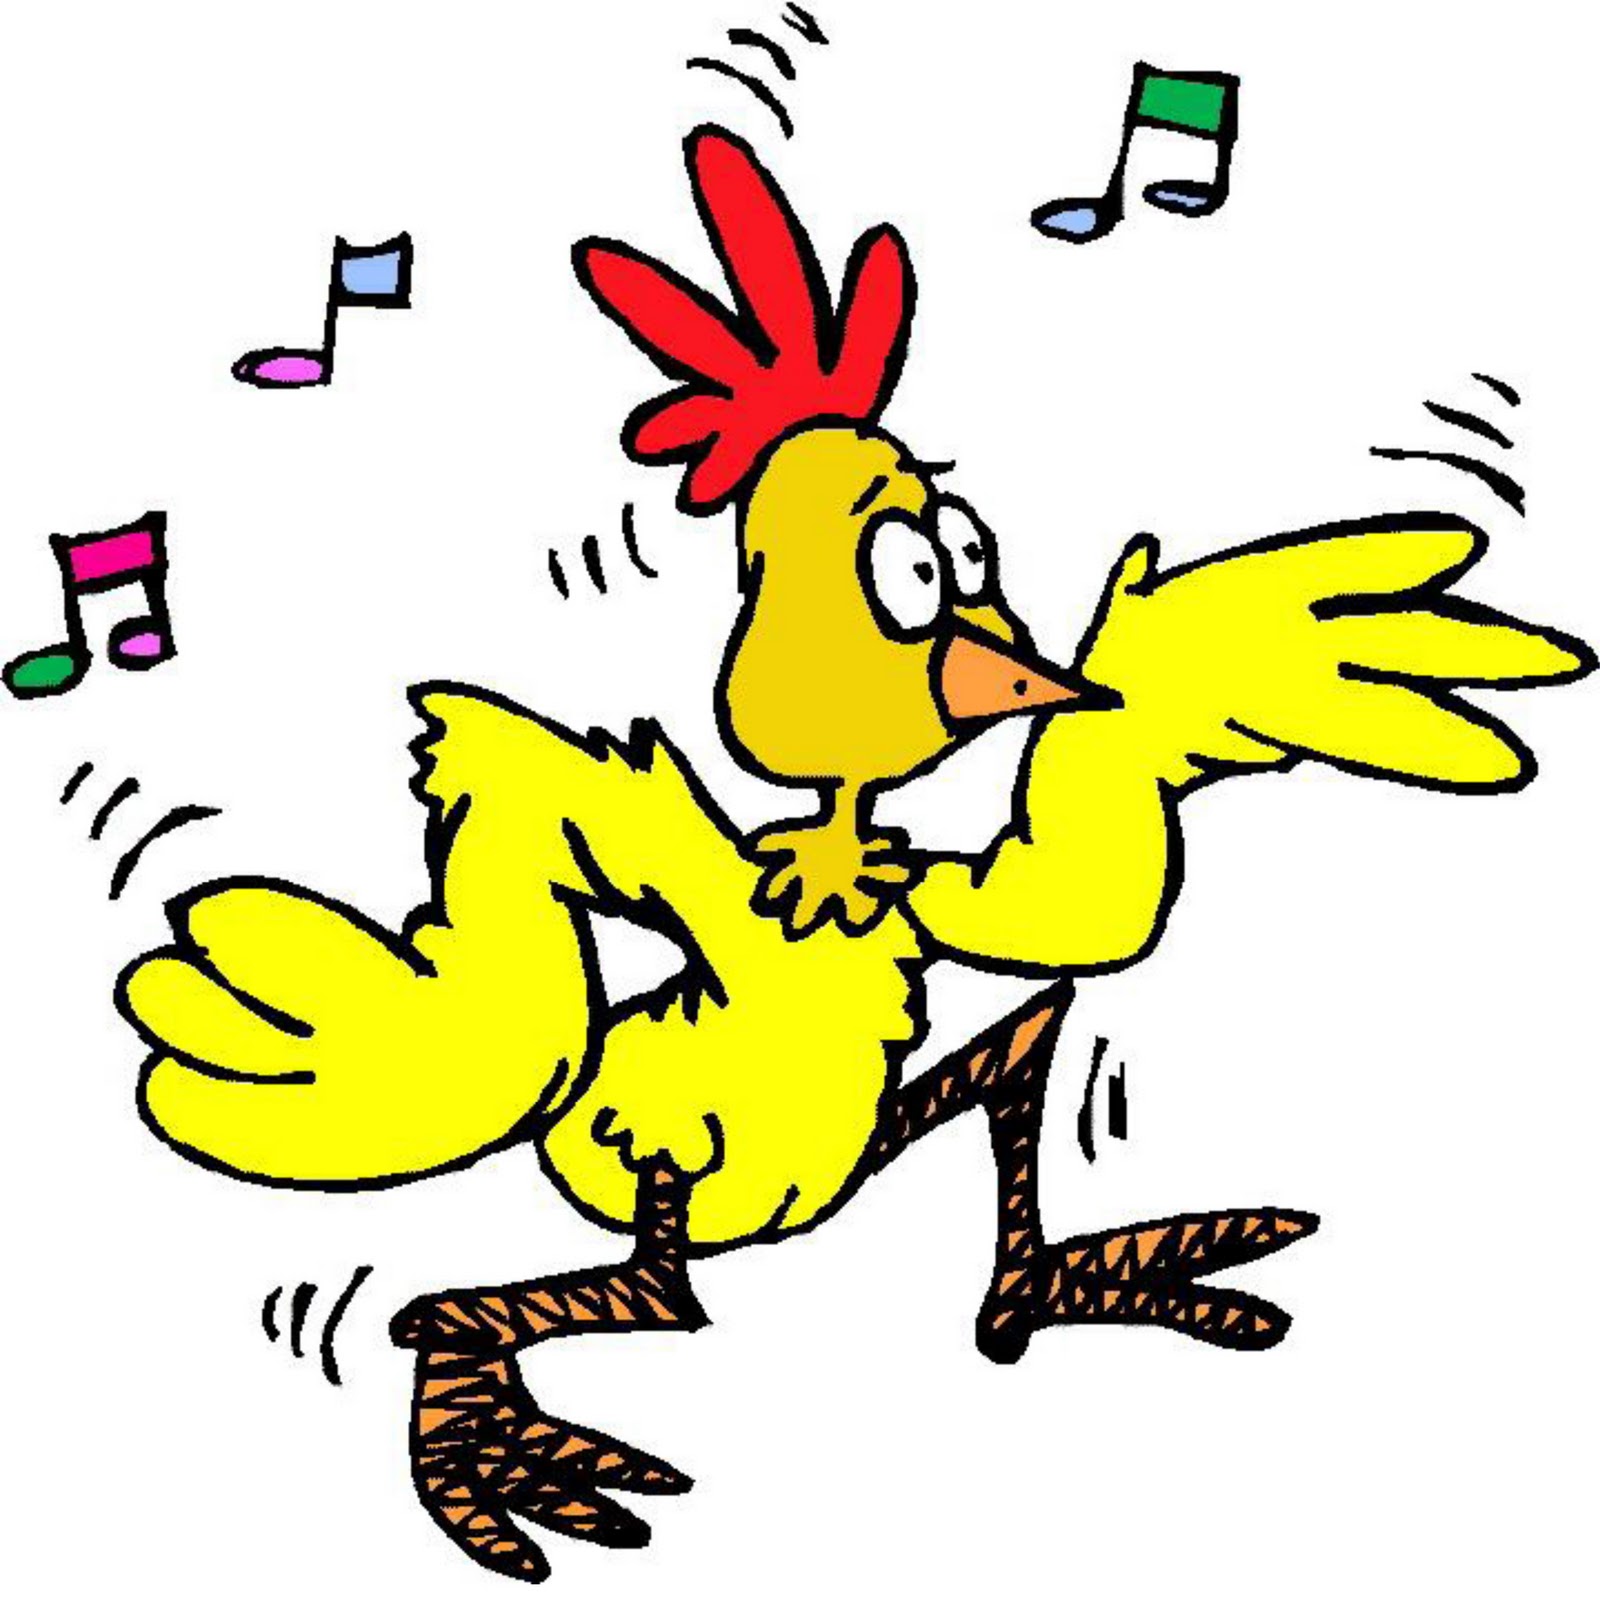 dancing yellow chicken with music notes floating around it